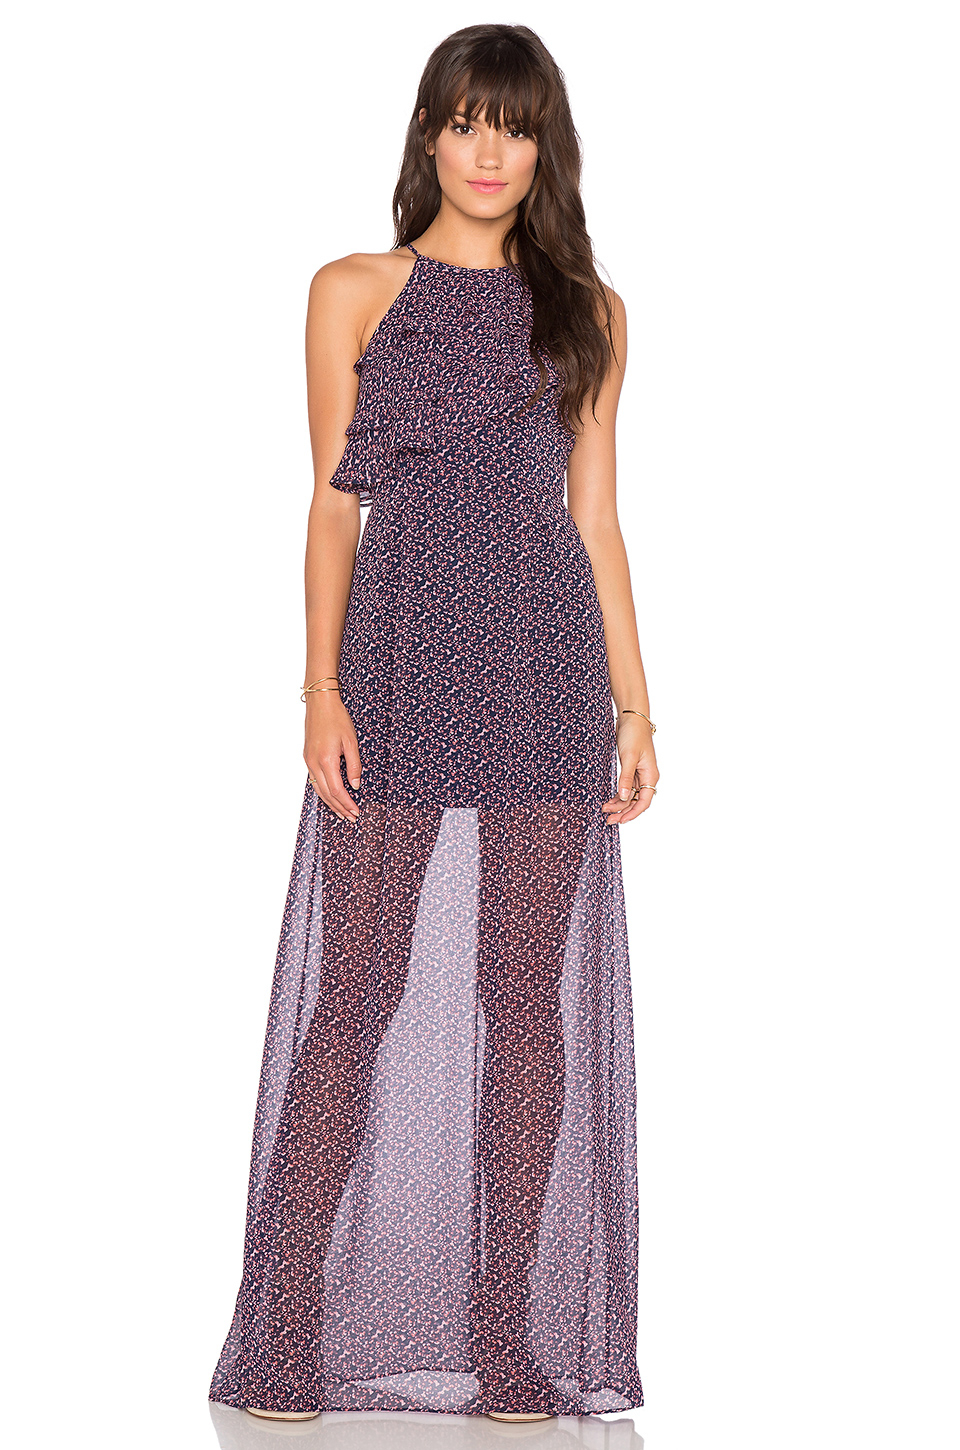 Lyst - Bcbgeneration Tiered Ruffle Crepe Maxi Dress in Blue